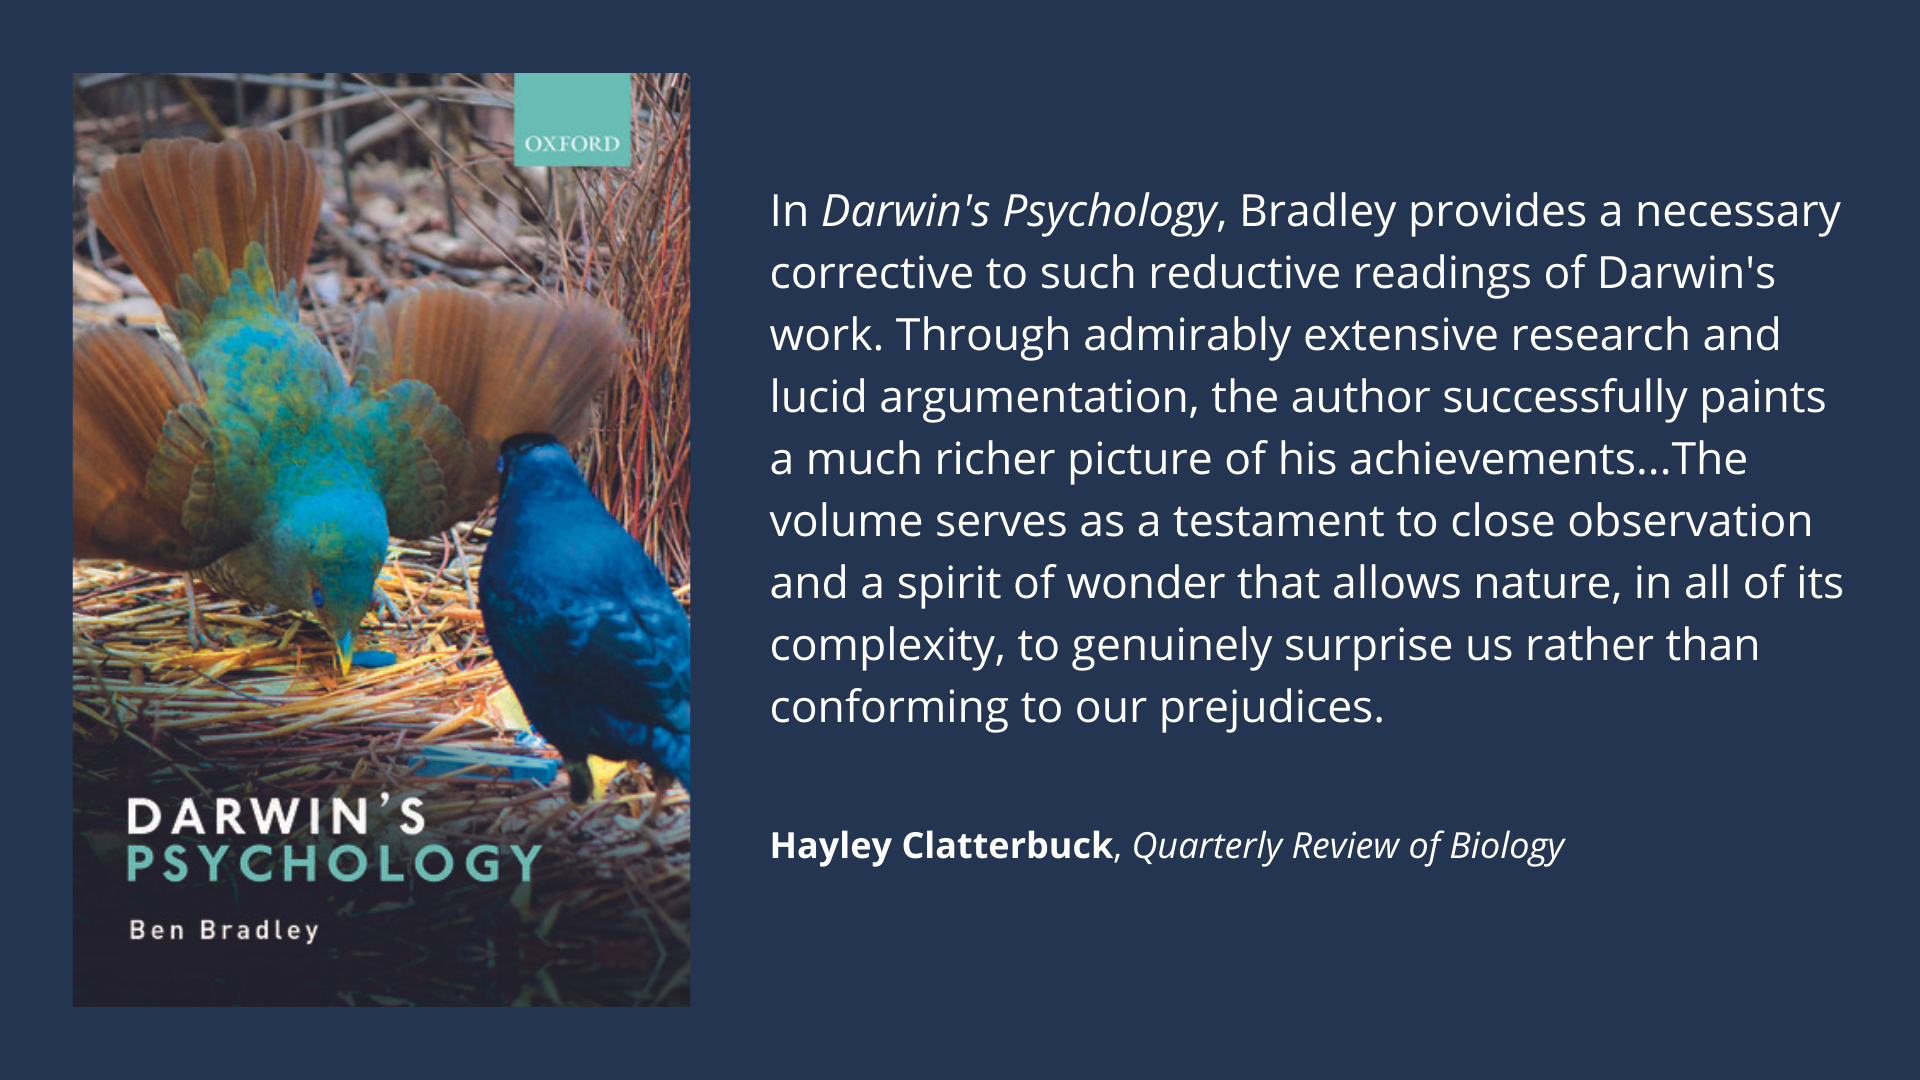 Darwin's Psychology: The Theatre of Agency, book cover and description.